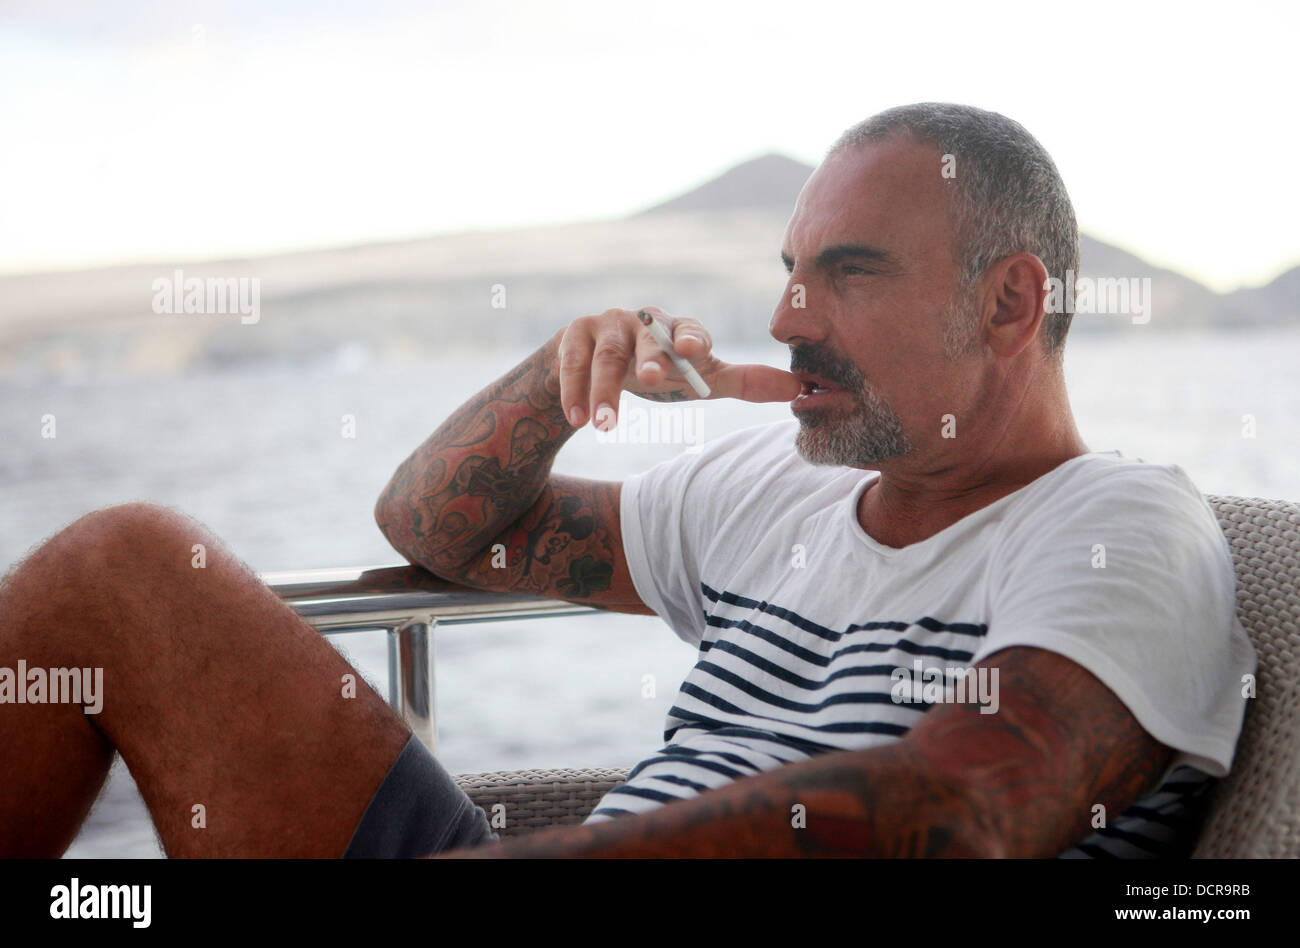 CHRISTIAN AUDIGIER Photograph of Christian in Jeans Smoking a Cigarette 